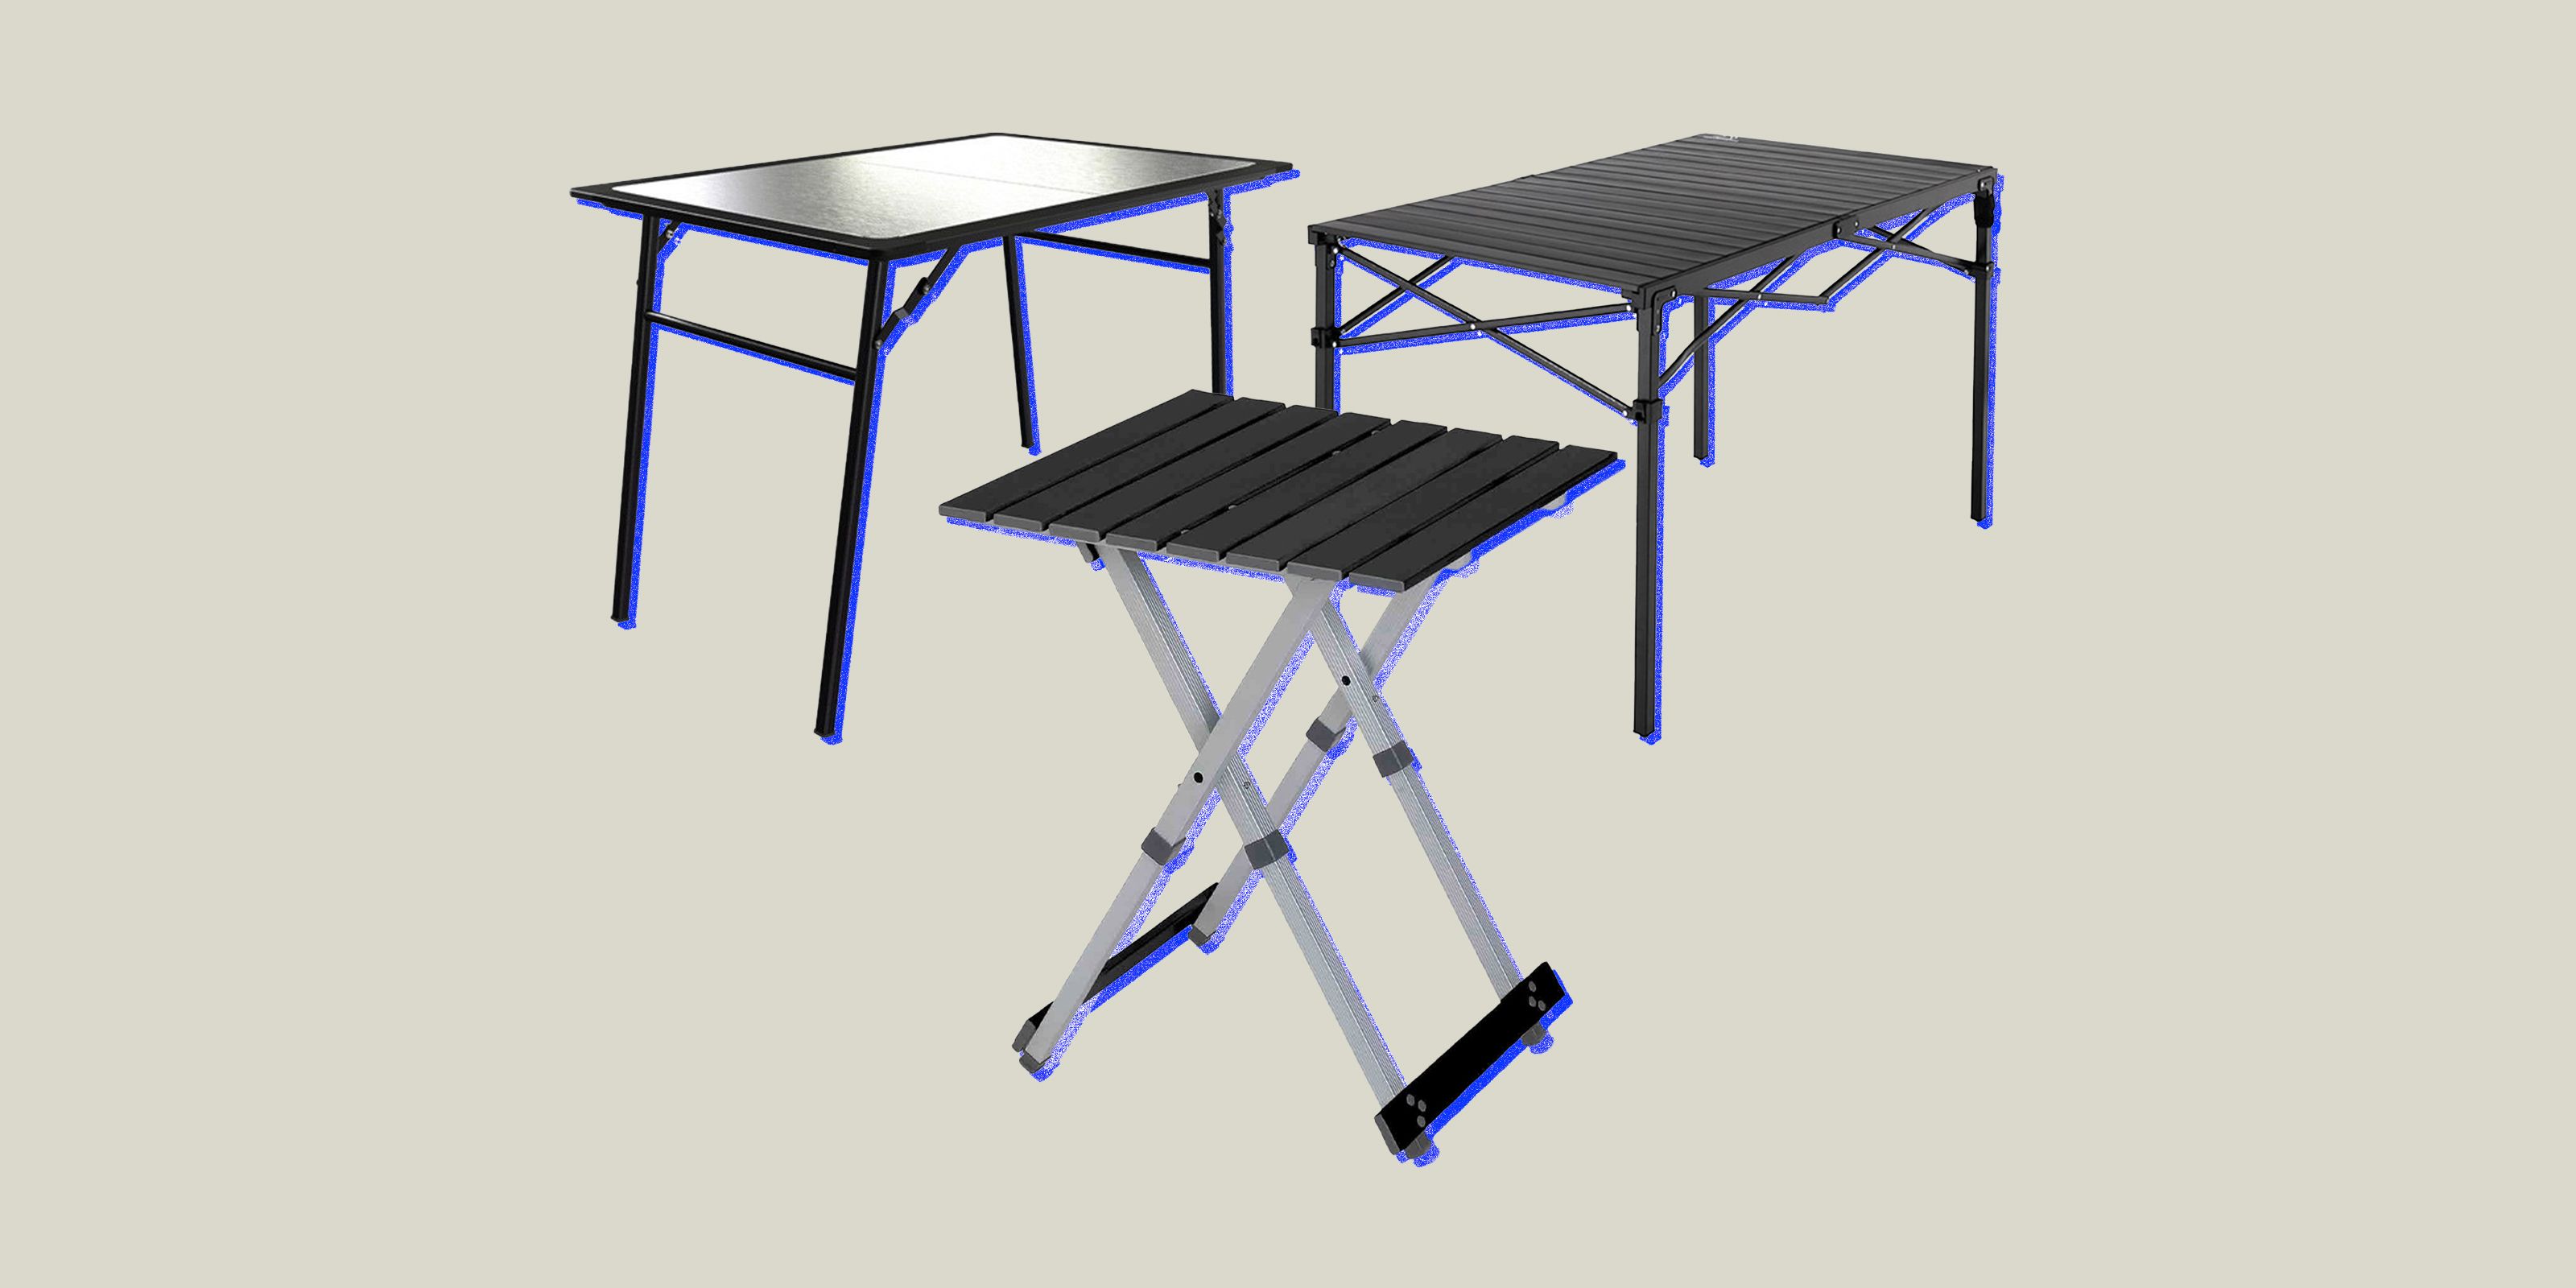 in 3 Sizes-Camping Table Garden Table Folding Table Aluminium Suitcase Table Folding 